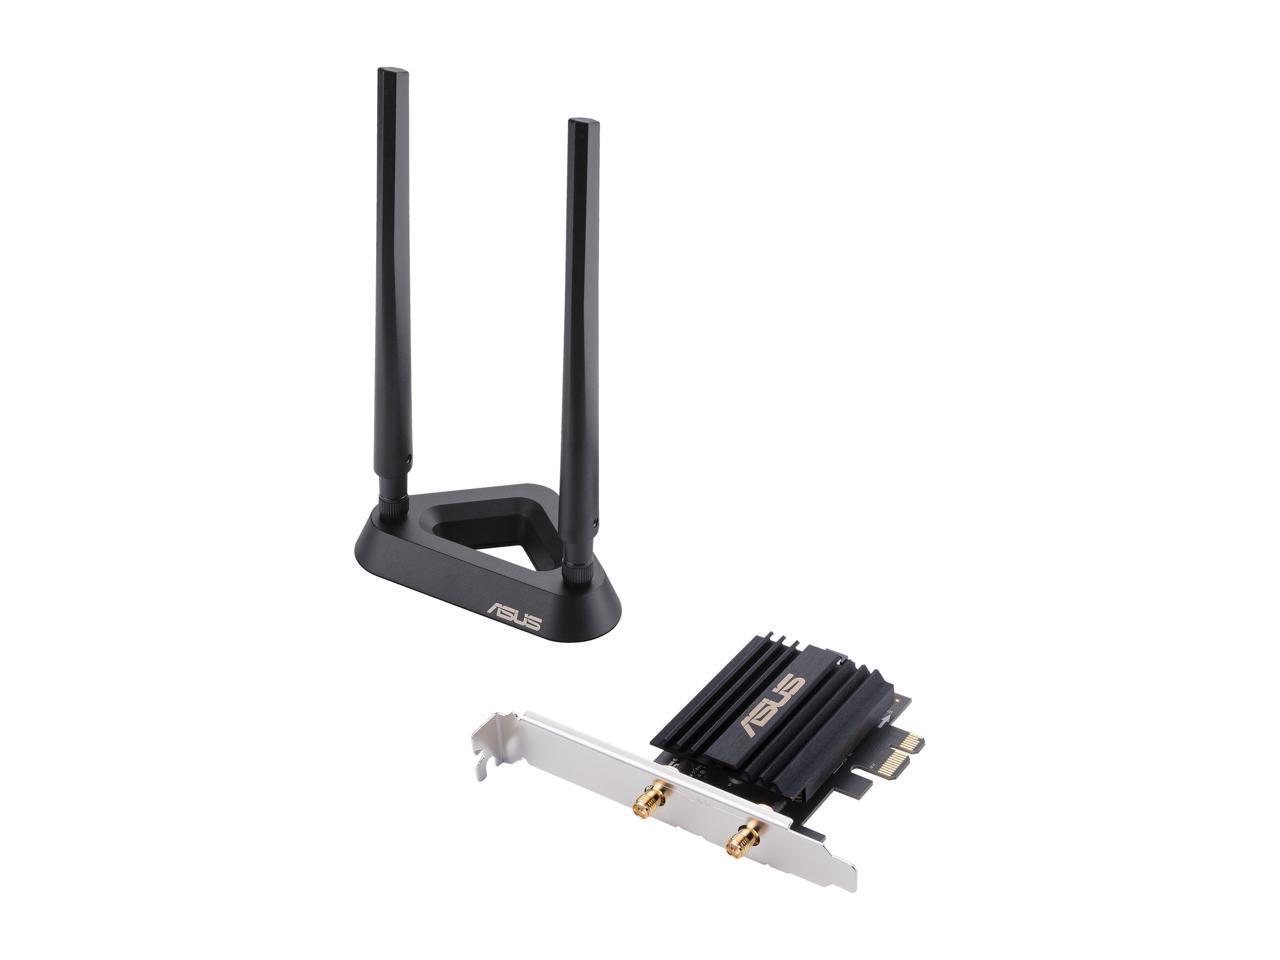 ASUS AX3000 (PCE-AX58BT) Next-Gen WiFi 6 Dual Band PCIe Wireless Adapter with Bluetooth 5.0 - OFDMA, 2x2 MU-MIMO and WPA3 Security - image 2 of 11